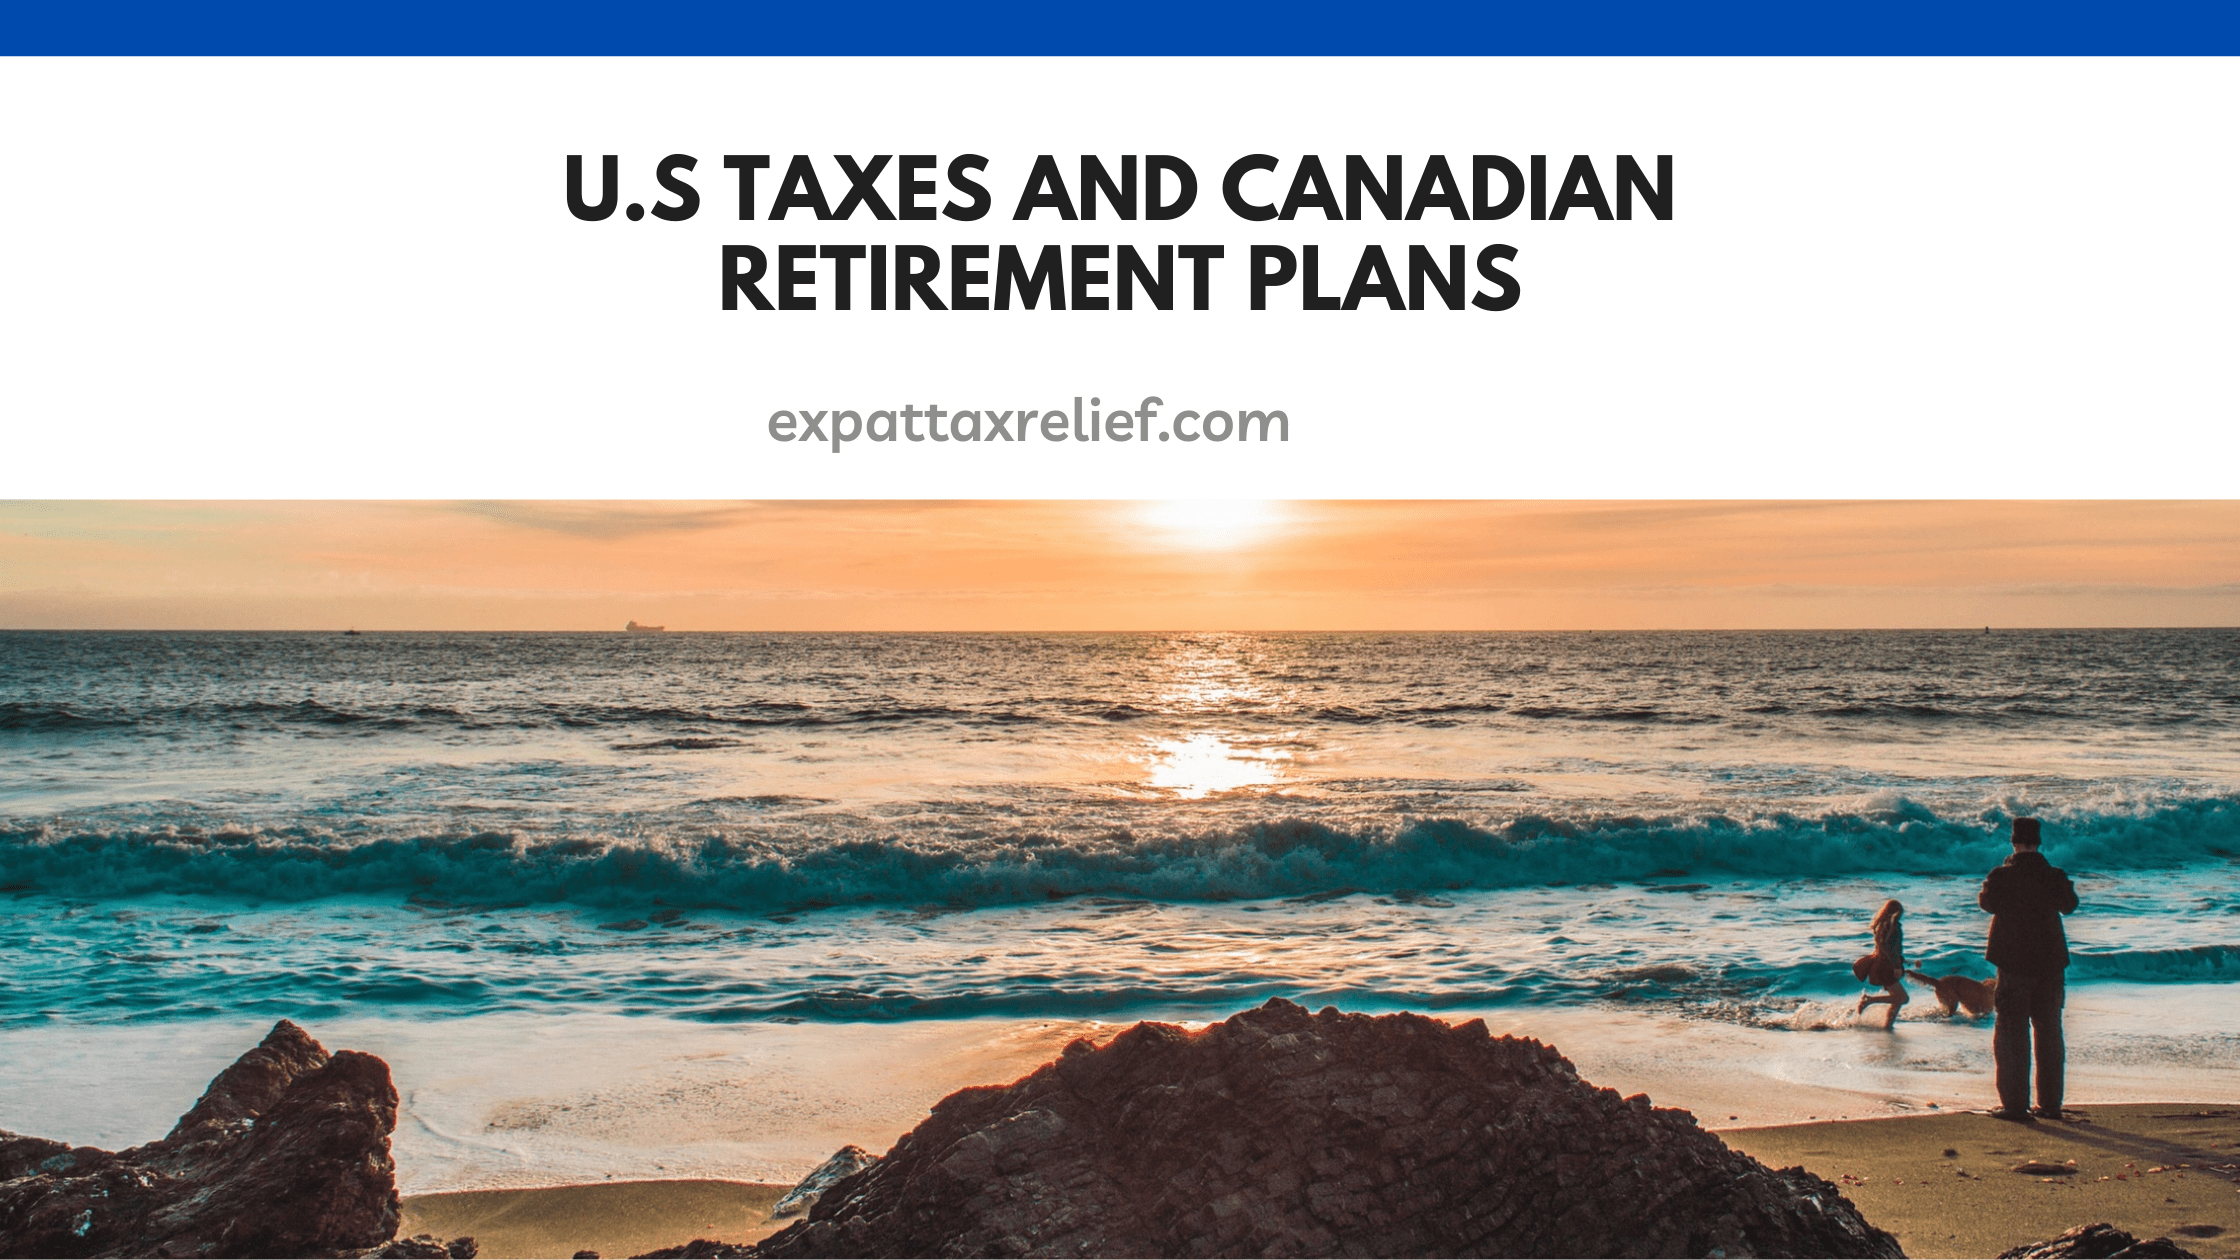 U.S Taxes and Canadian Retirement plans